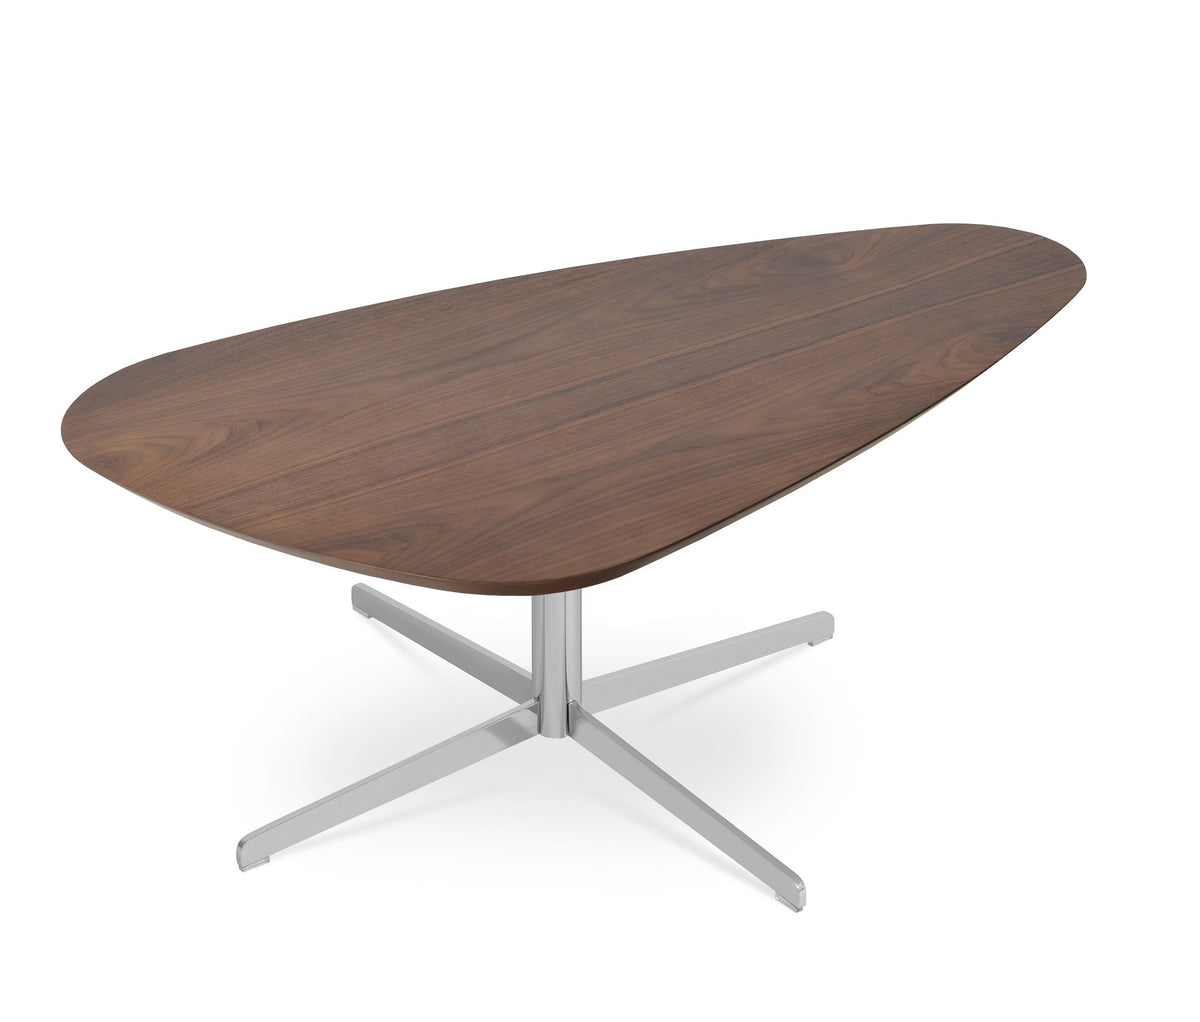 Island Coffee Table - 4 Star Base by Soho Concept